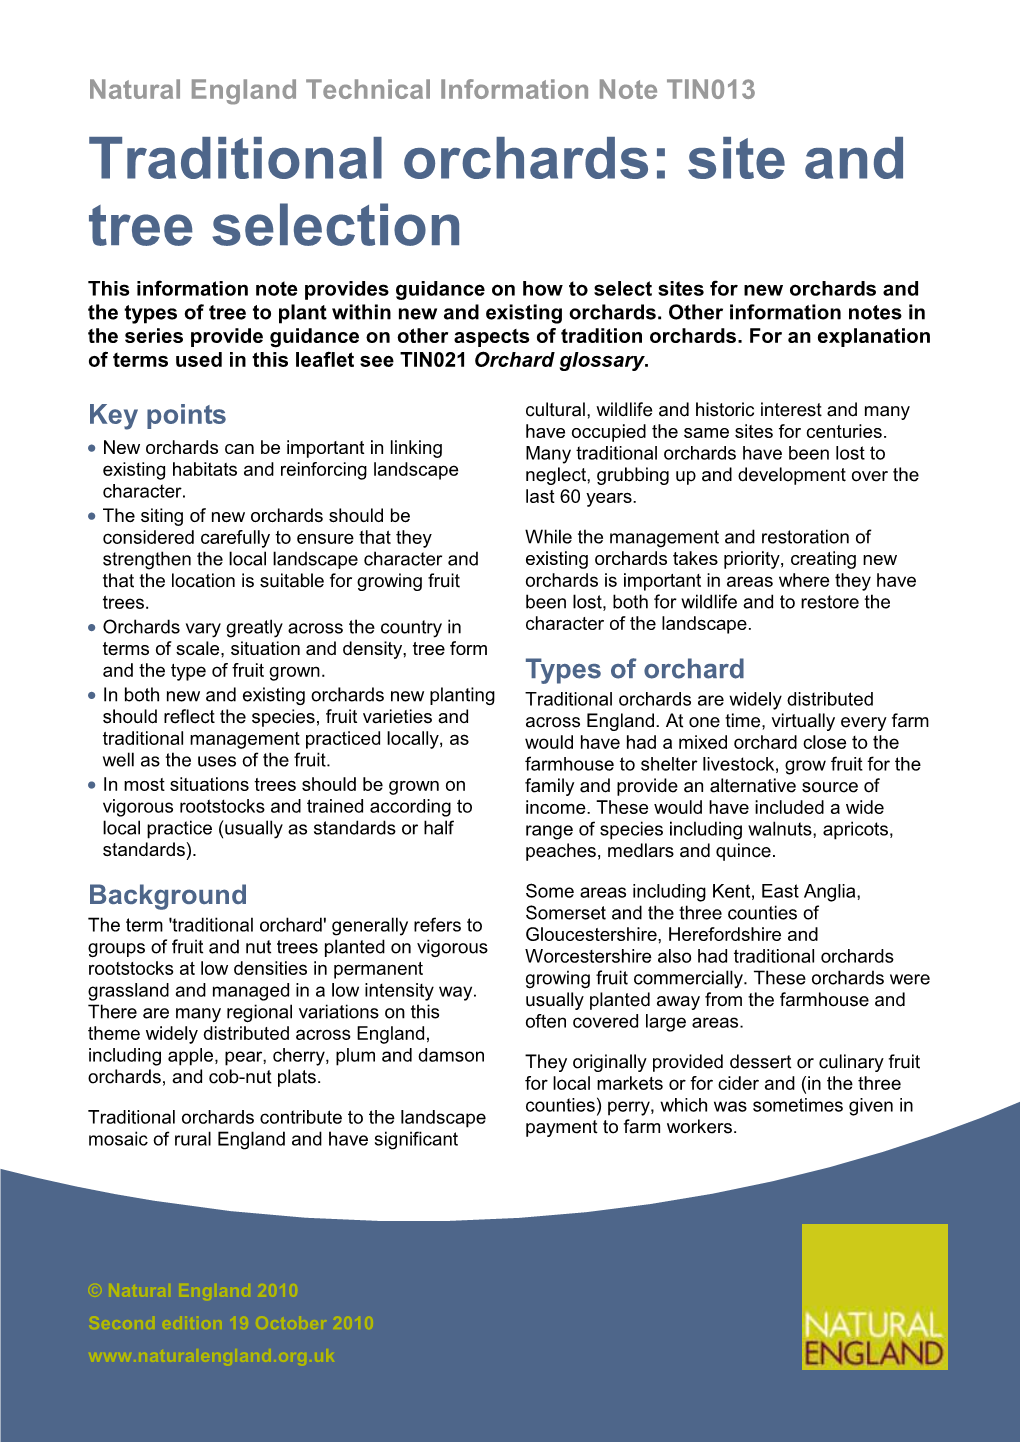 Traditional Orchards: Site and Tree Selection